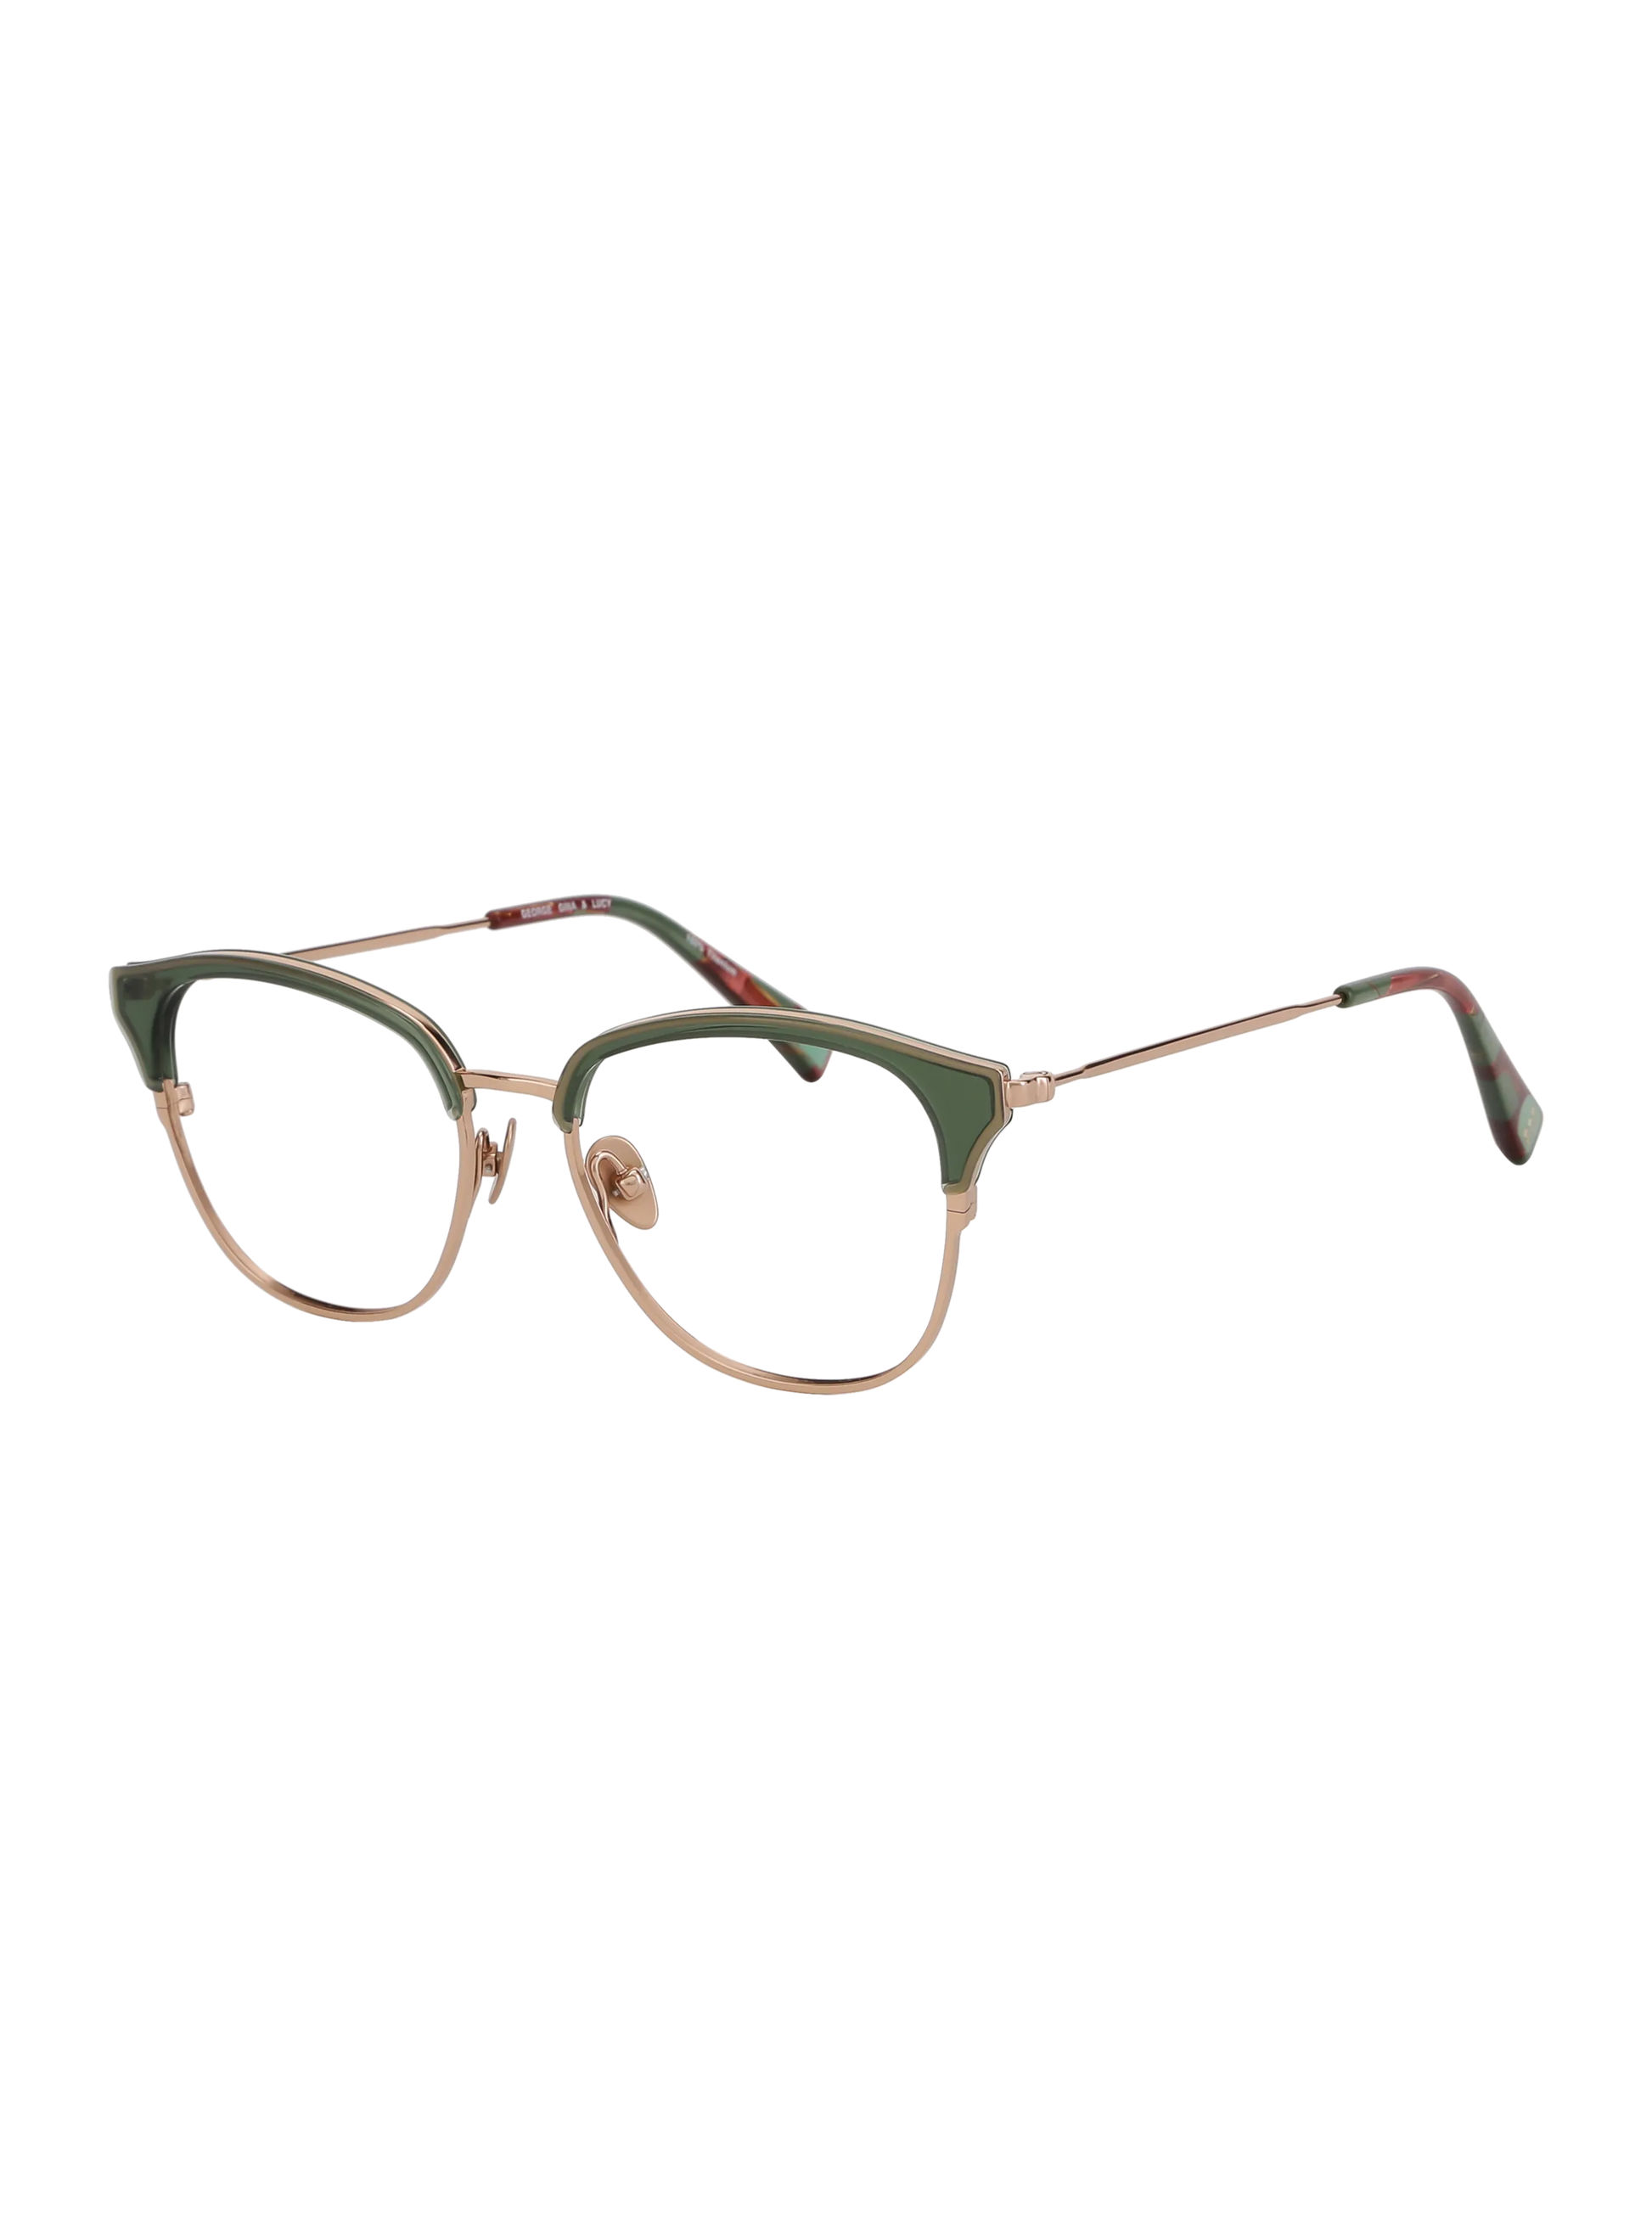 Farbe_rosegold clear green 002